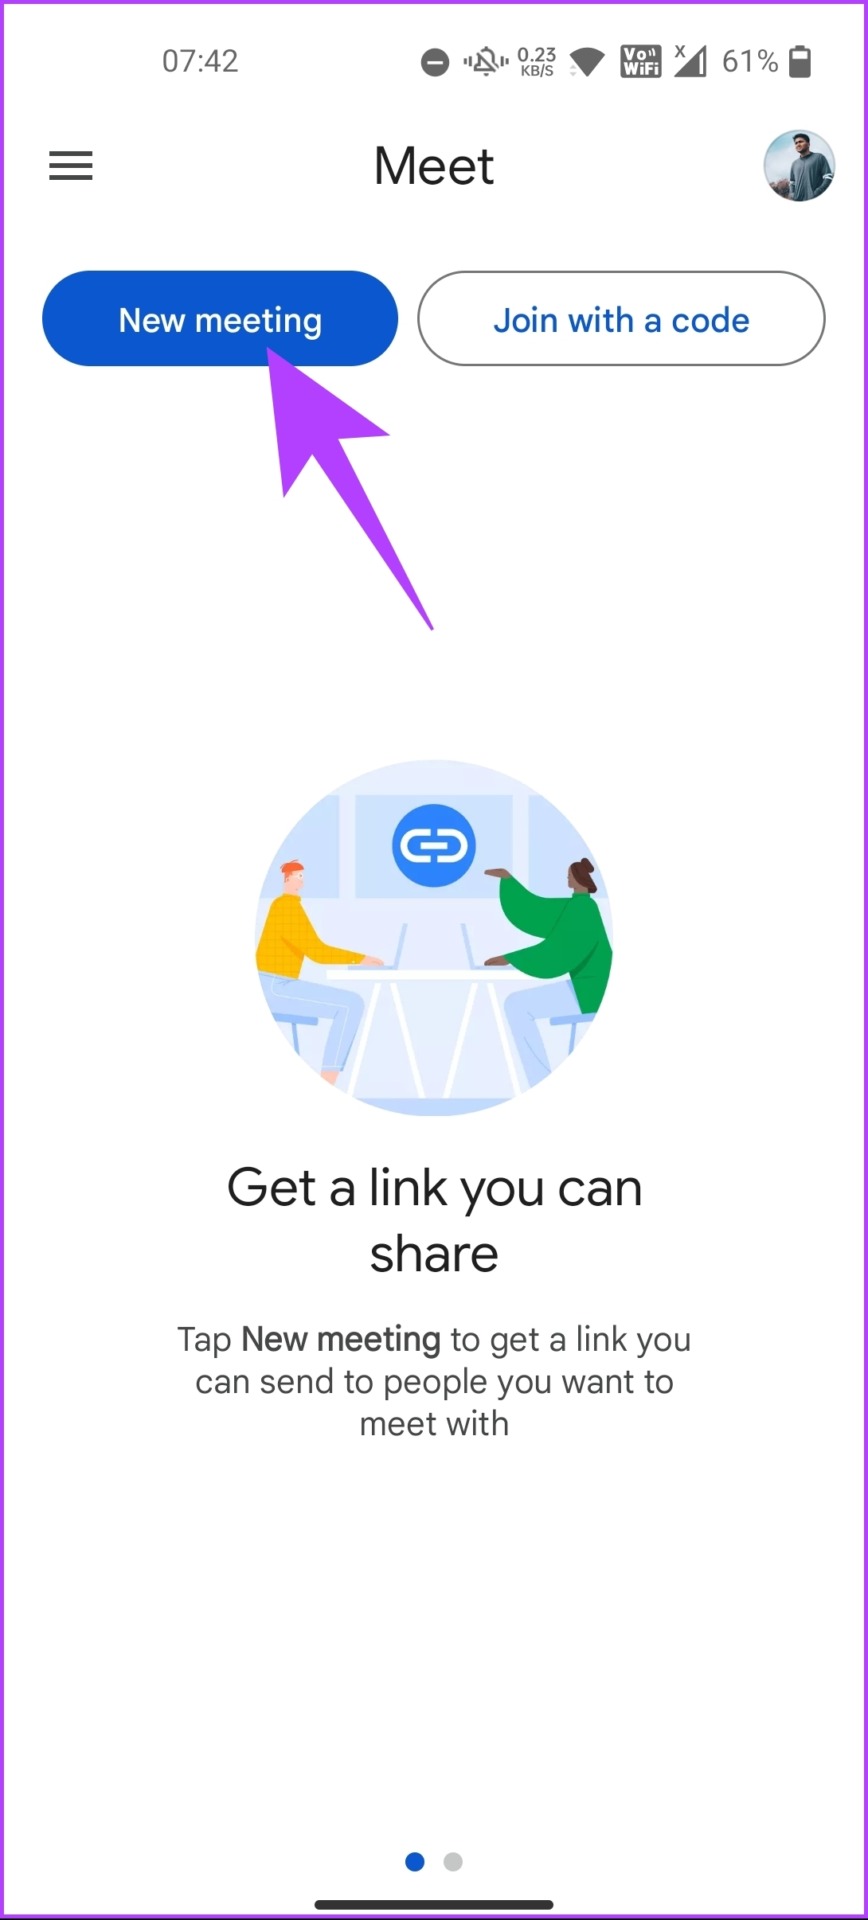 Tap on the New meeting button at the top